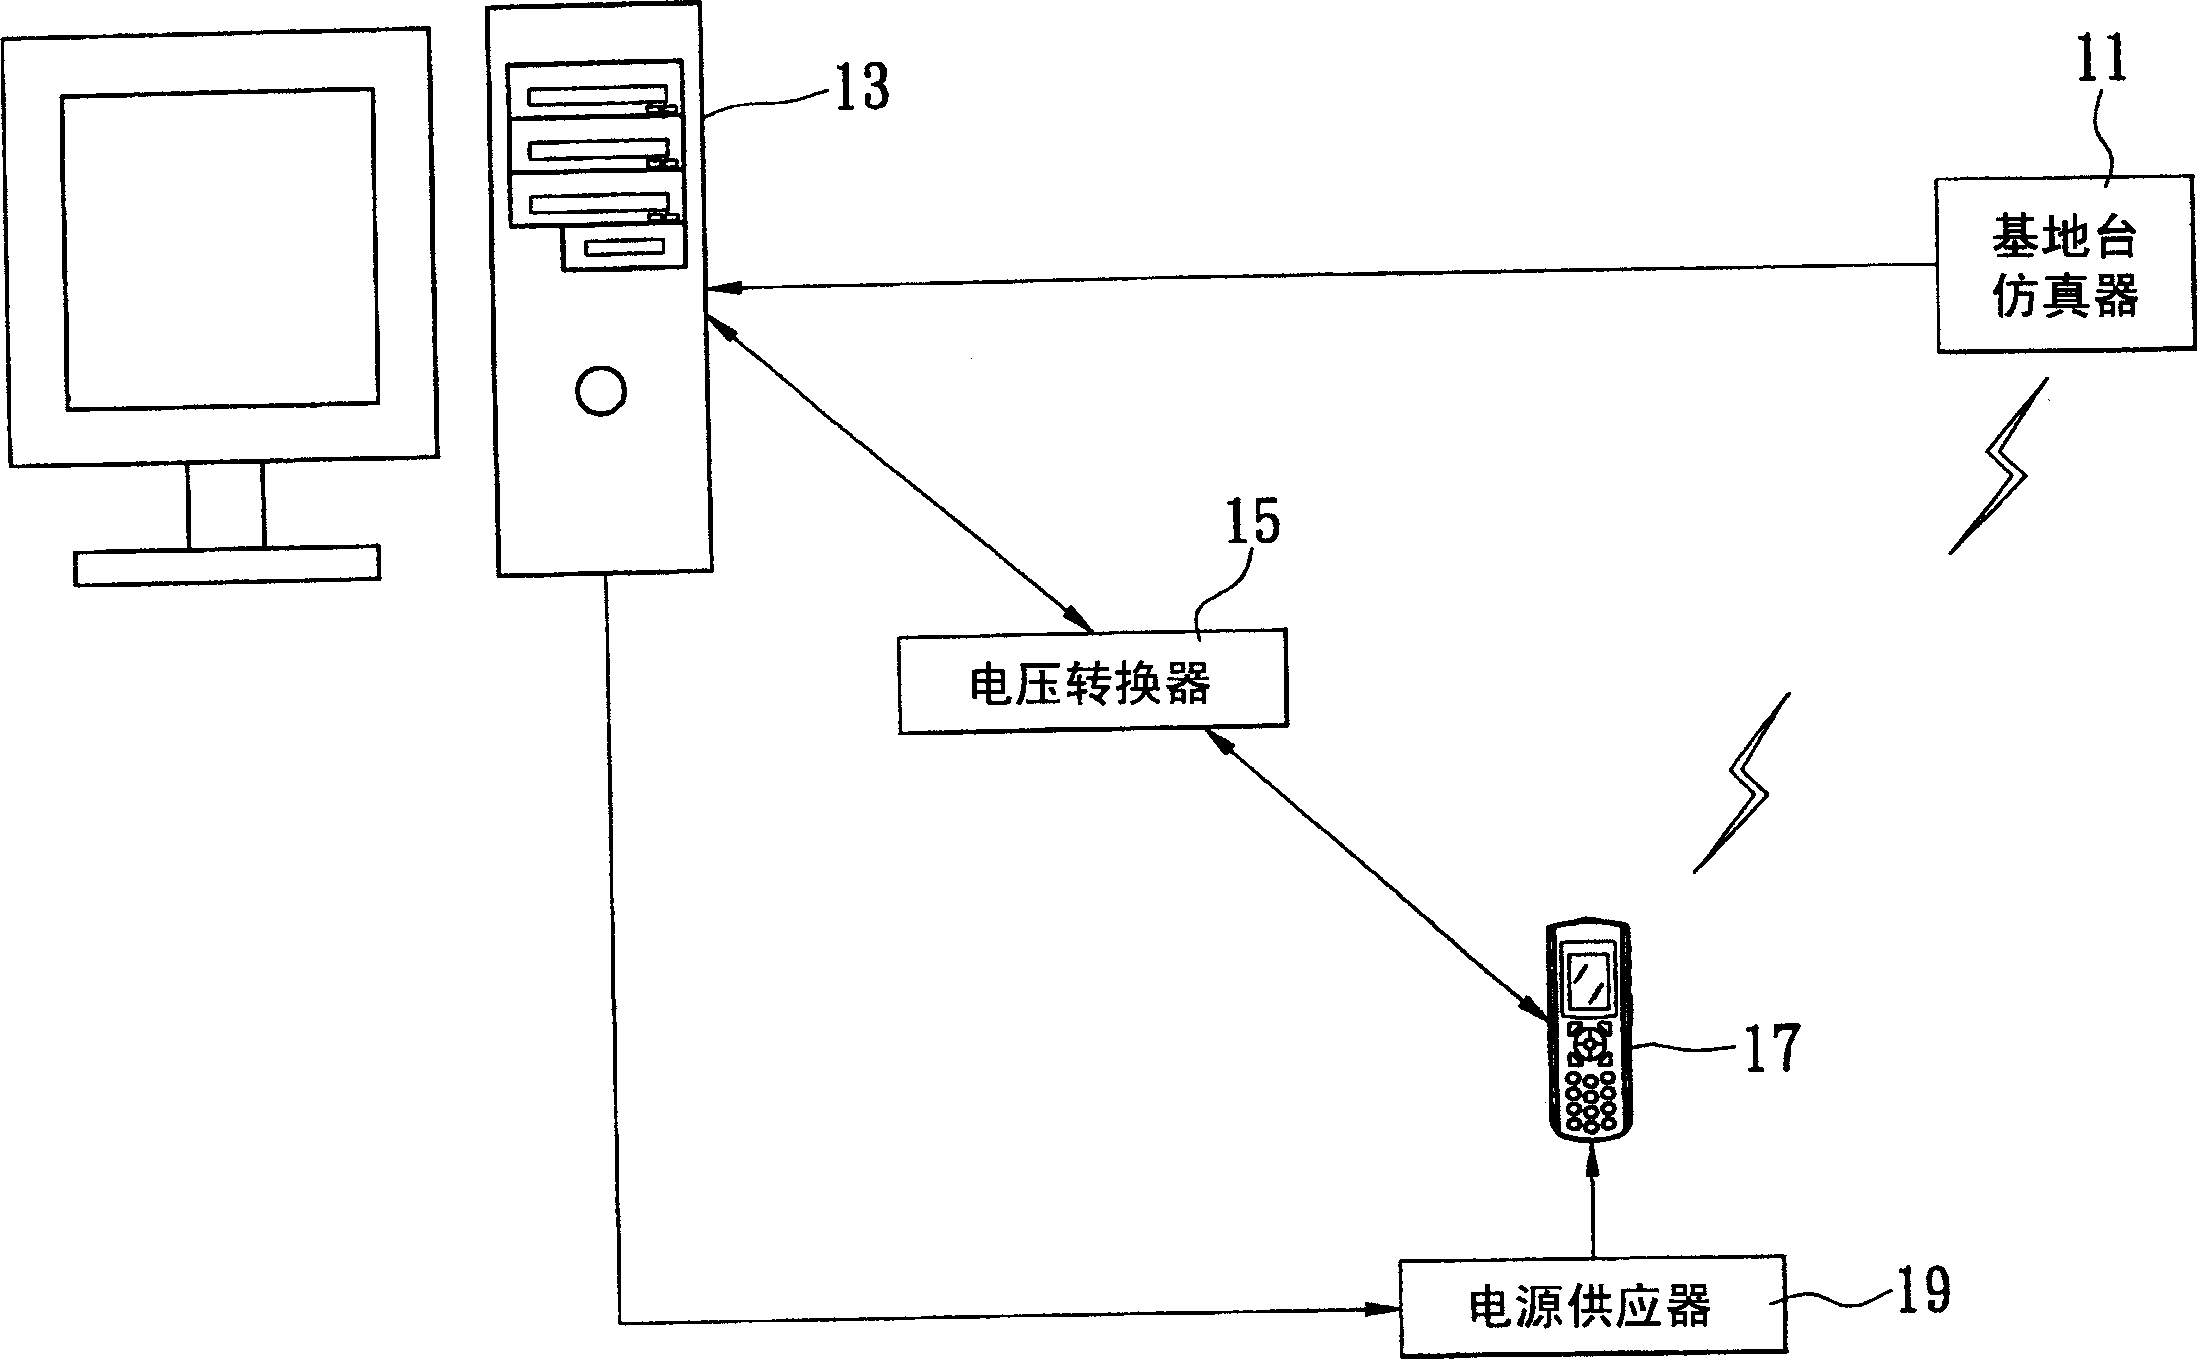 Automatic mobile testing system and method